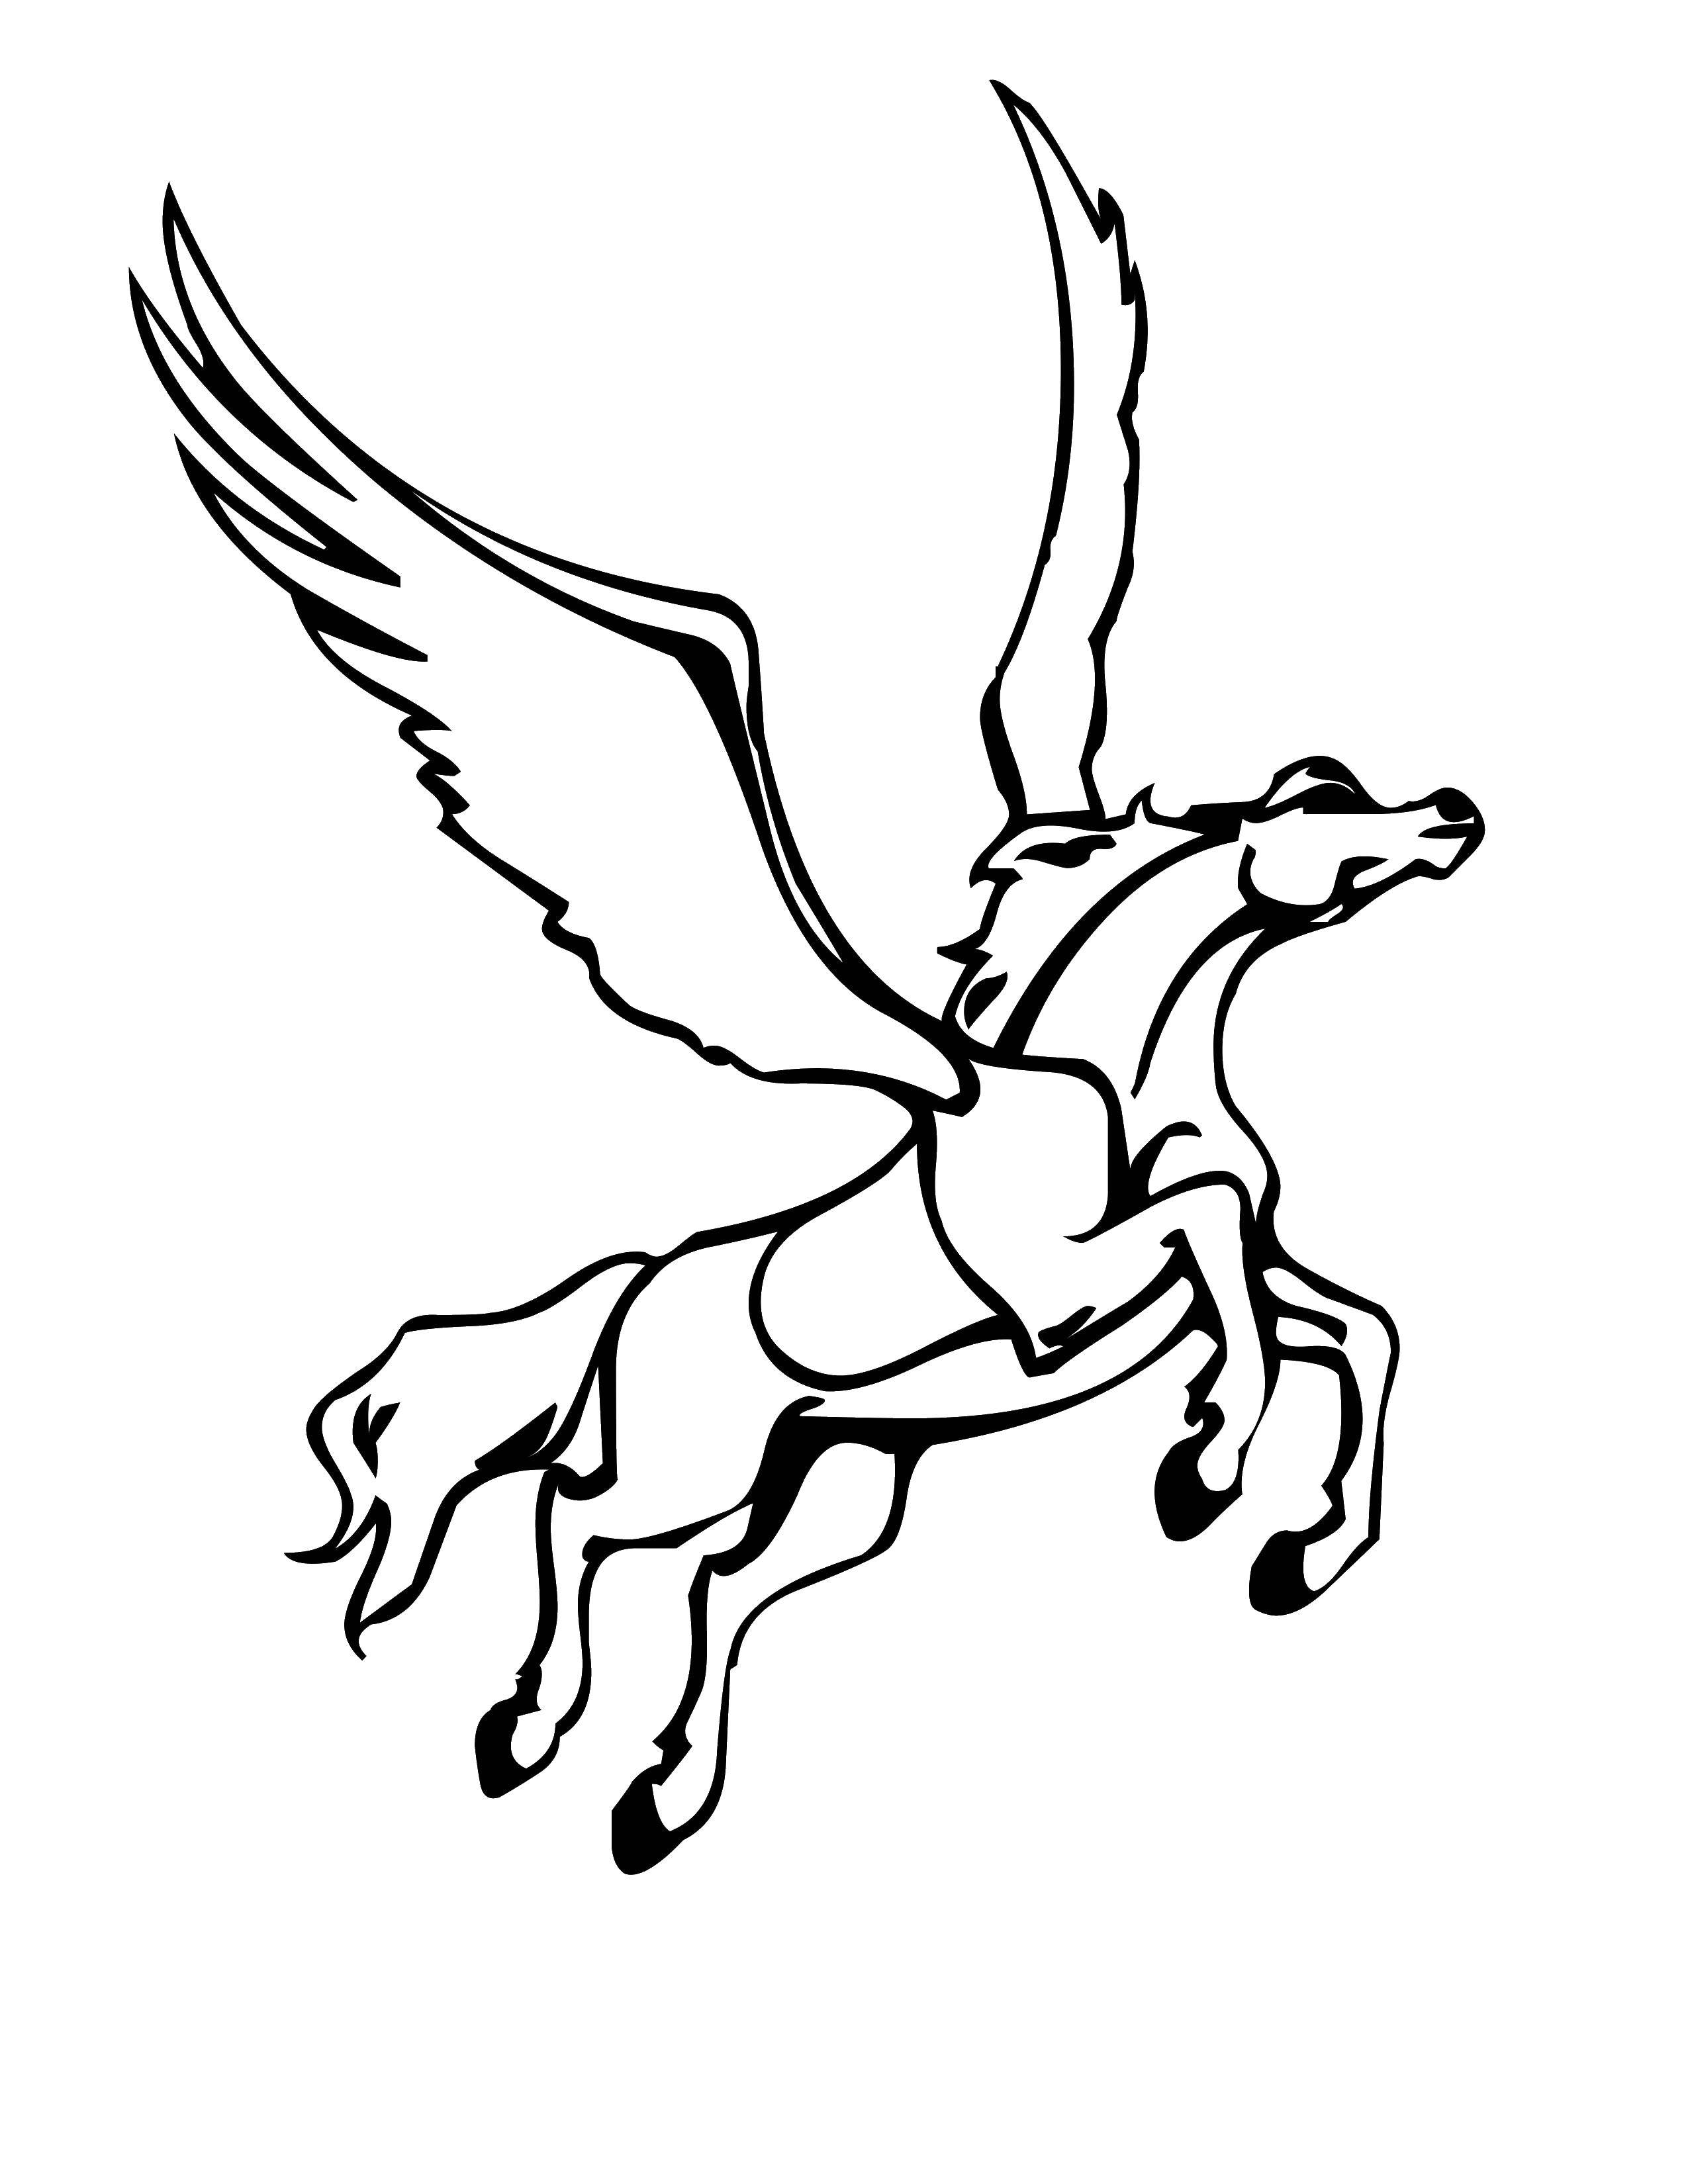 Coloring Wings and horse. Category coloring. Tags:  horse, wings.